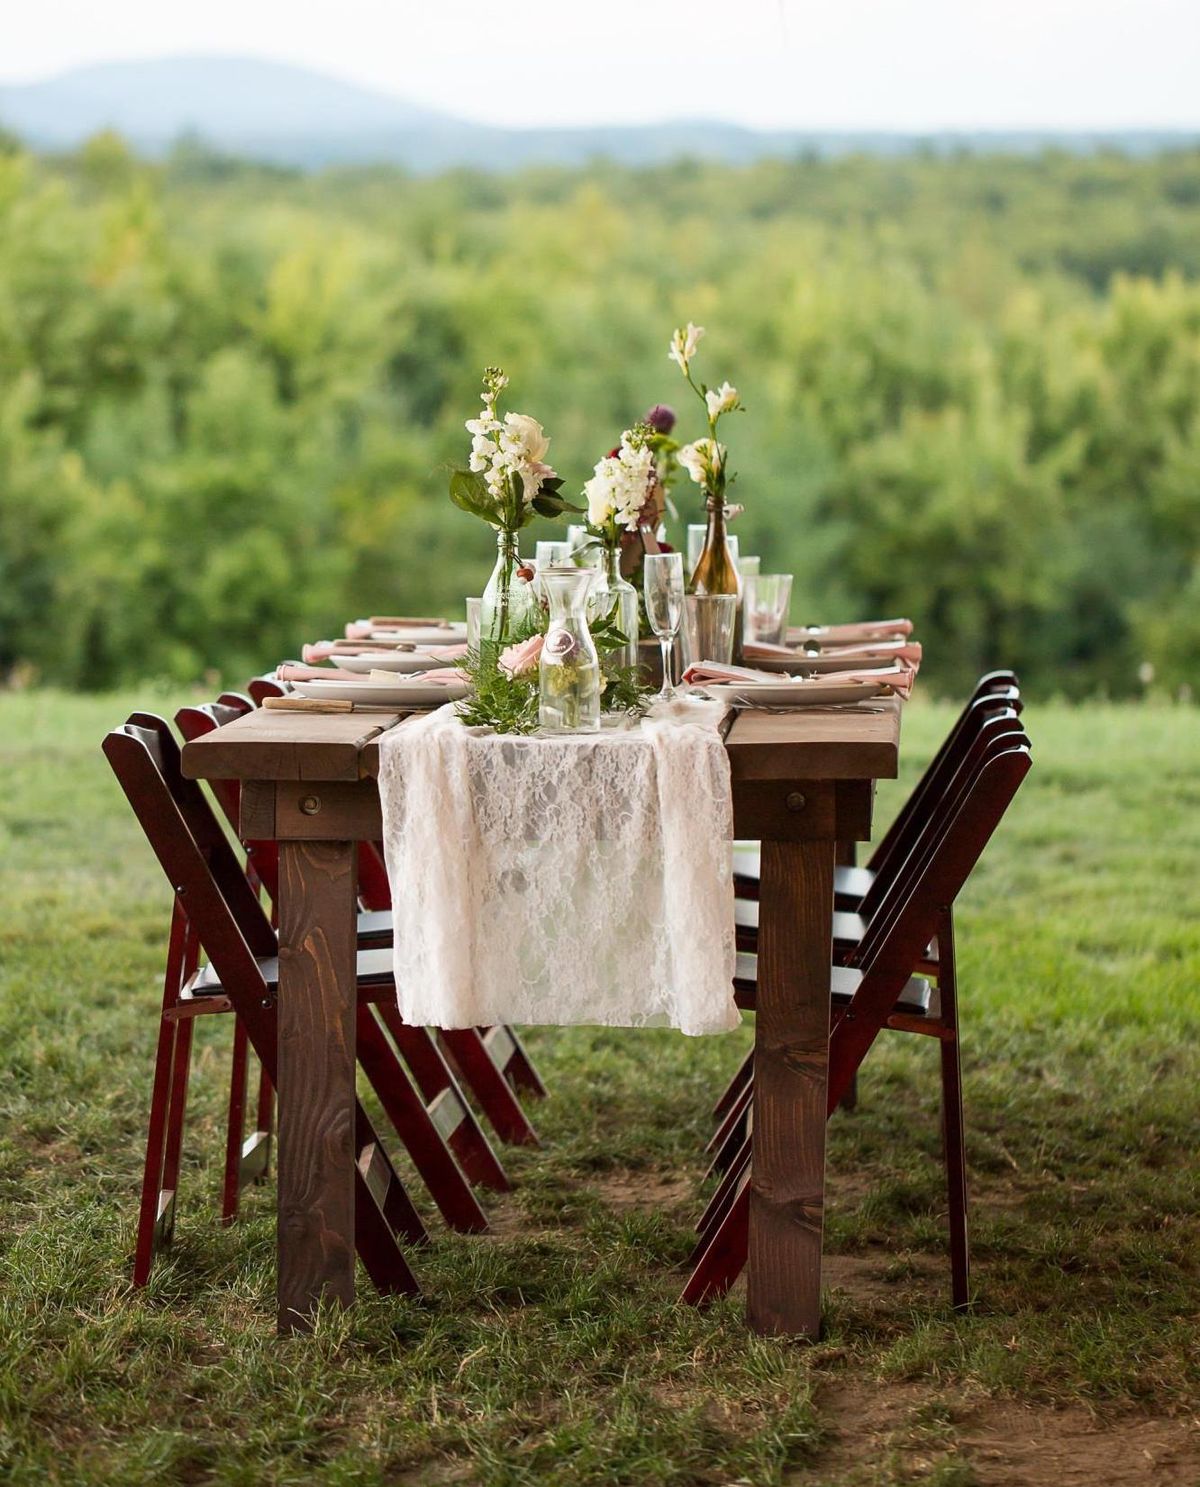 Midsummer Night in the Lavender - A farm to table dinner